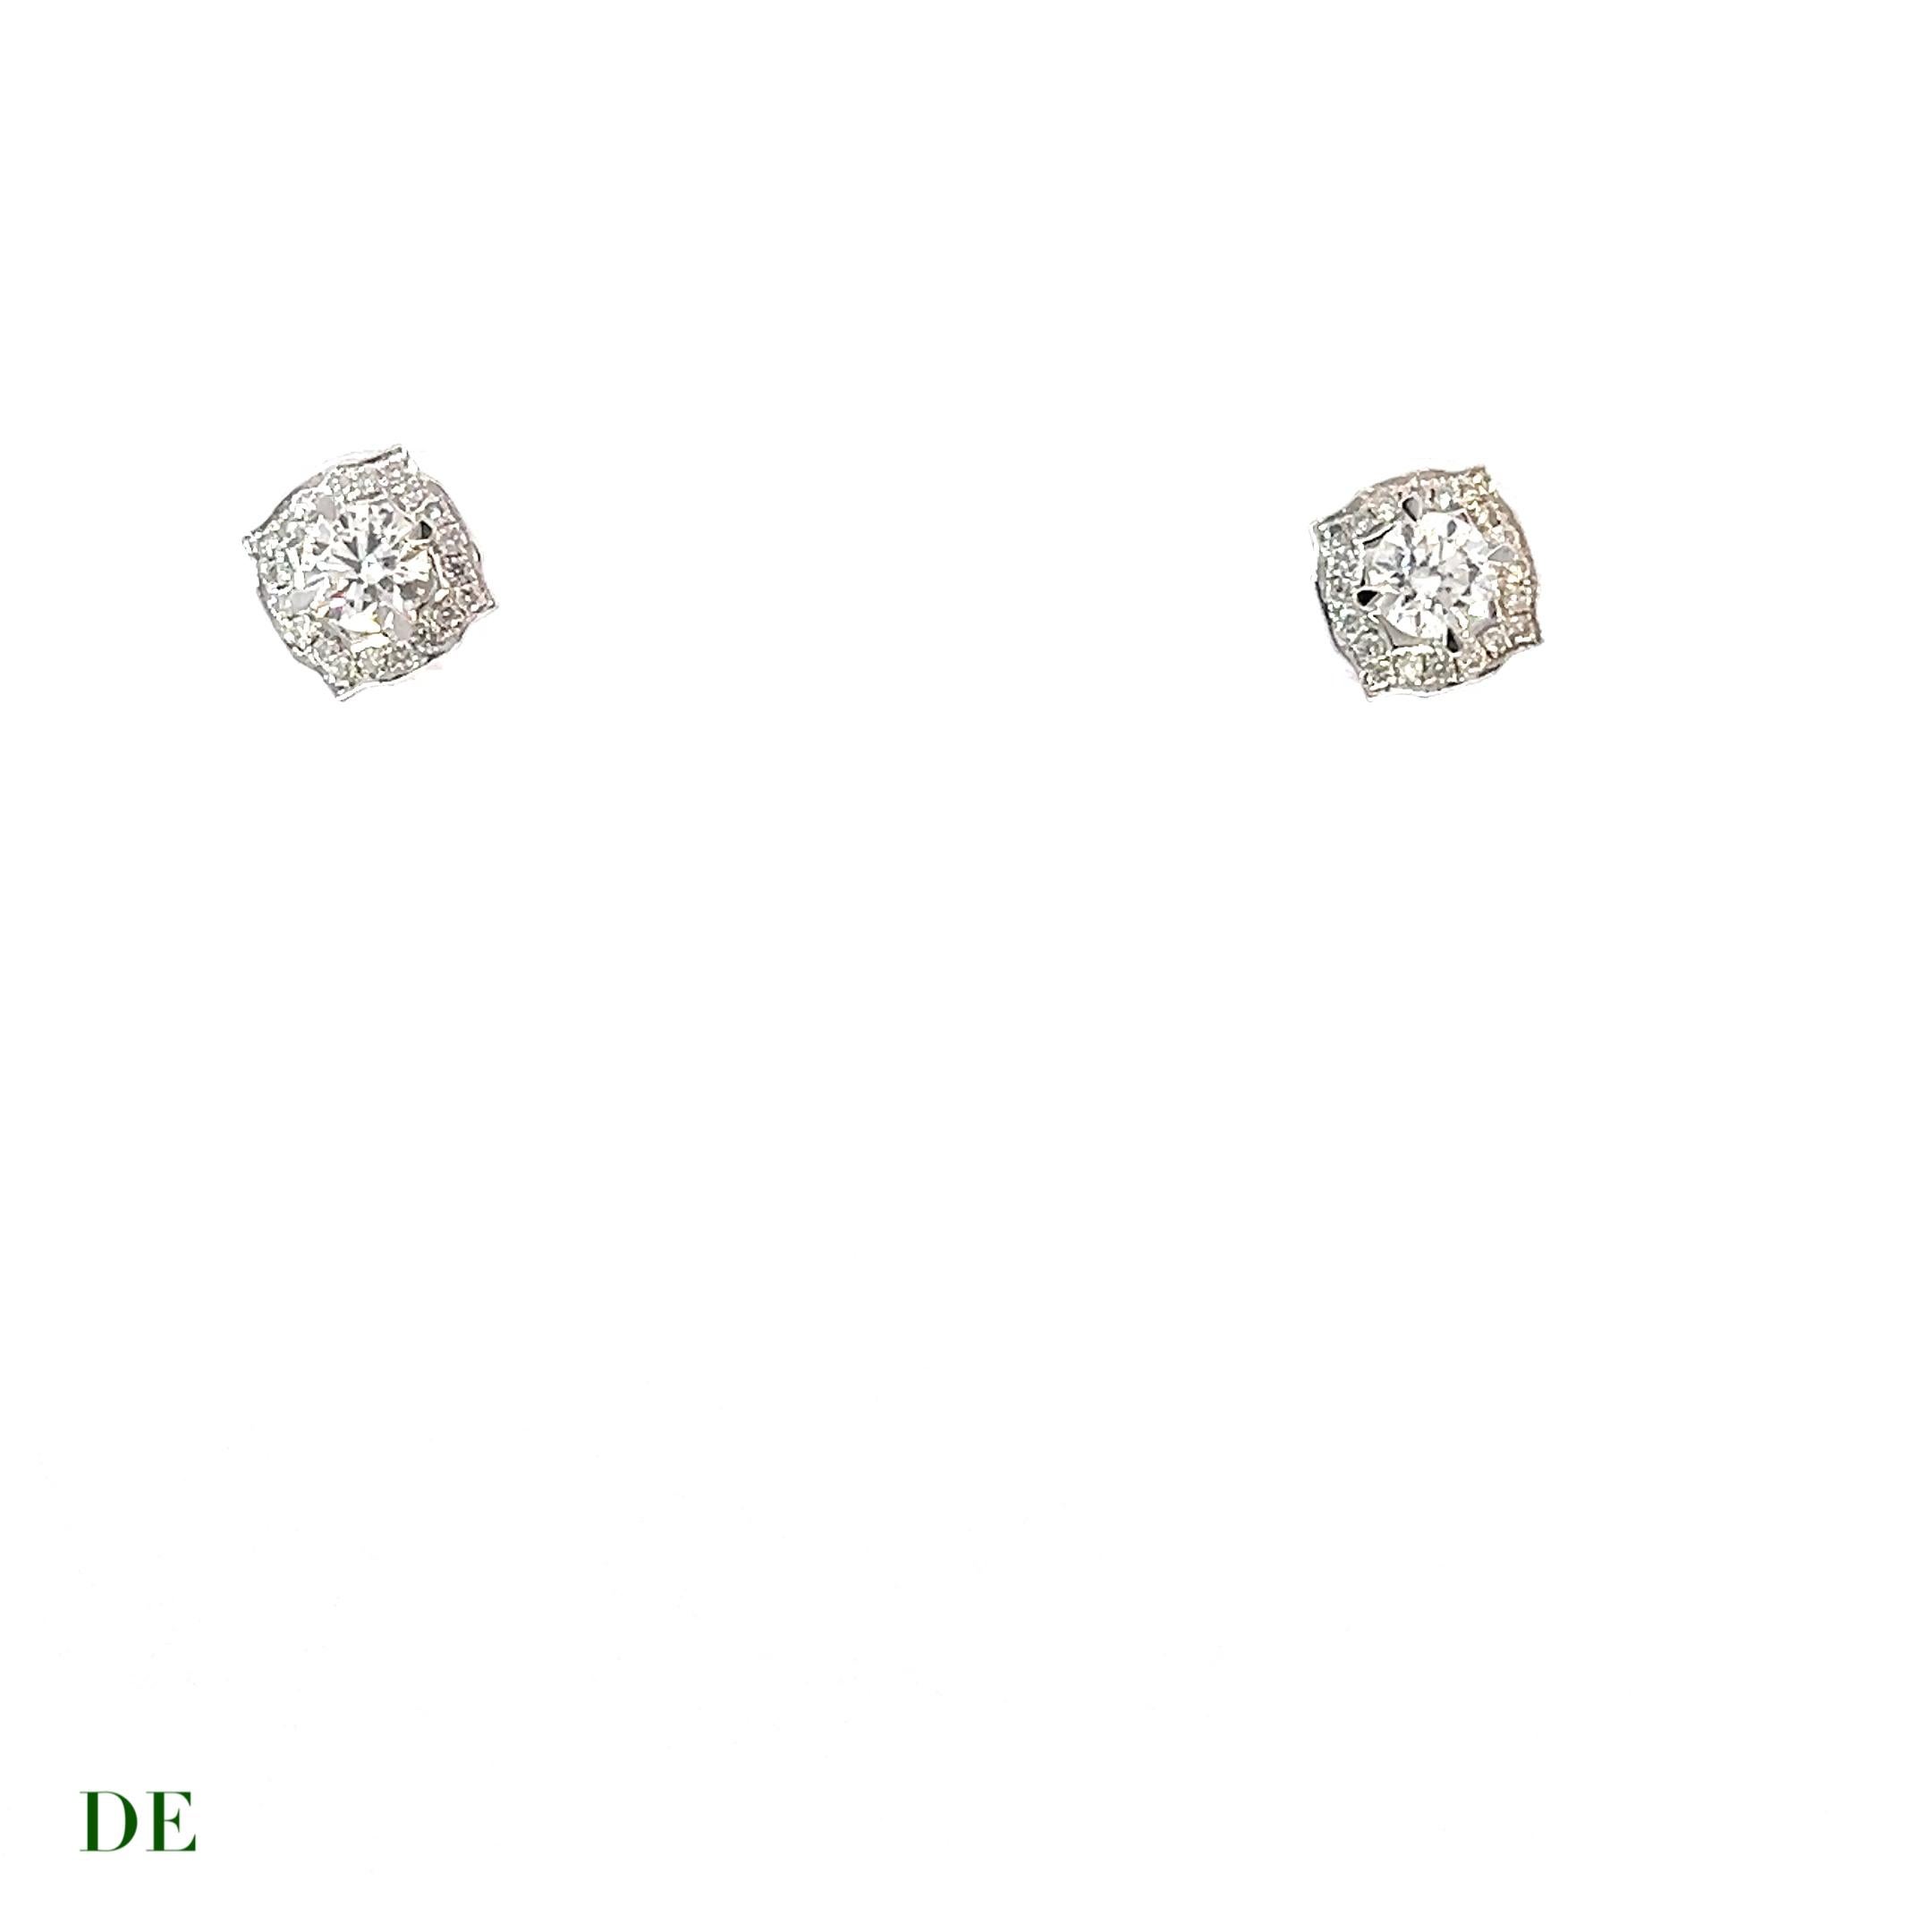 Timeless Classic Beauty 14k white gold with .73 Carat White Diamond Earring Stud

Introducing a pair of earrings that embodies timeless classic beauty: the 14k White Gold with .73 Carat White Diamond Earring Studs. These exquisite earrings are a